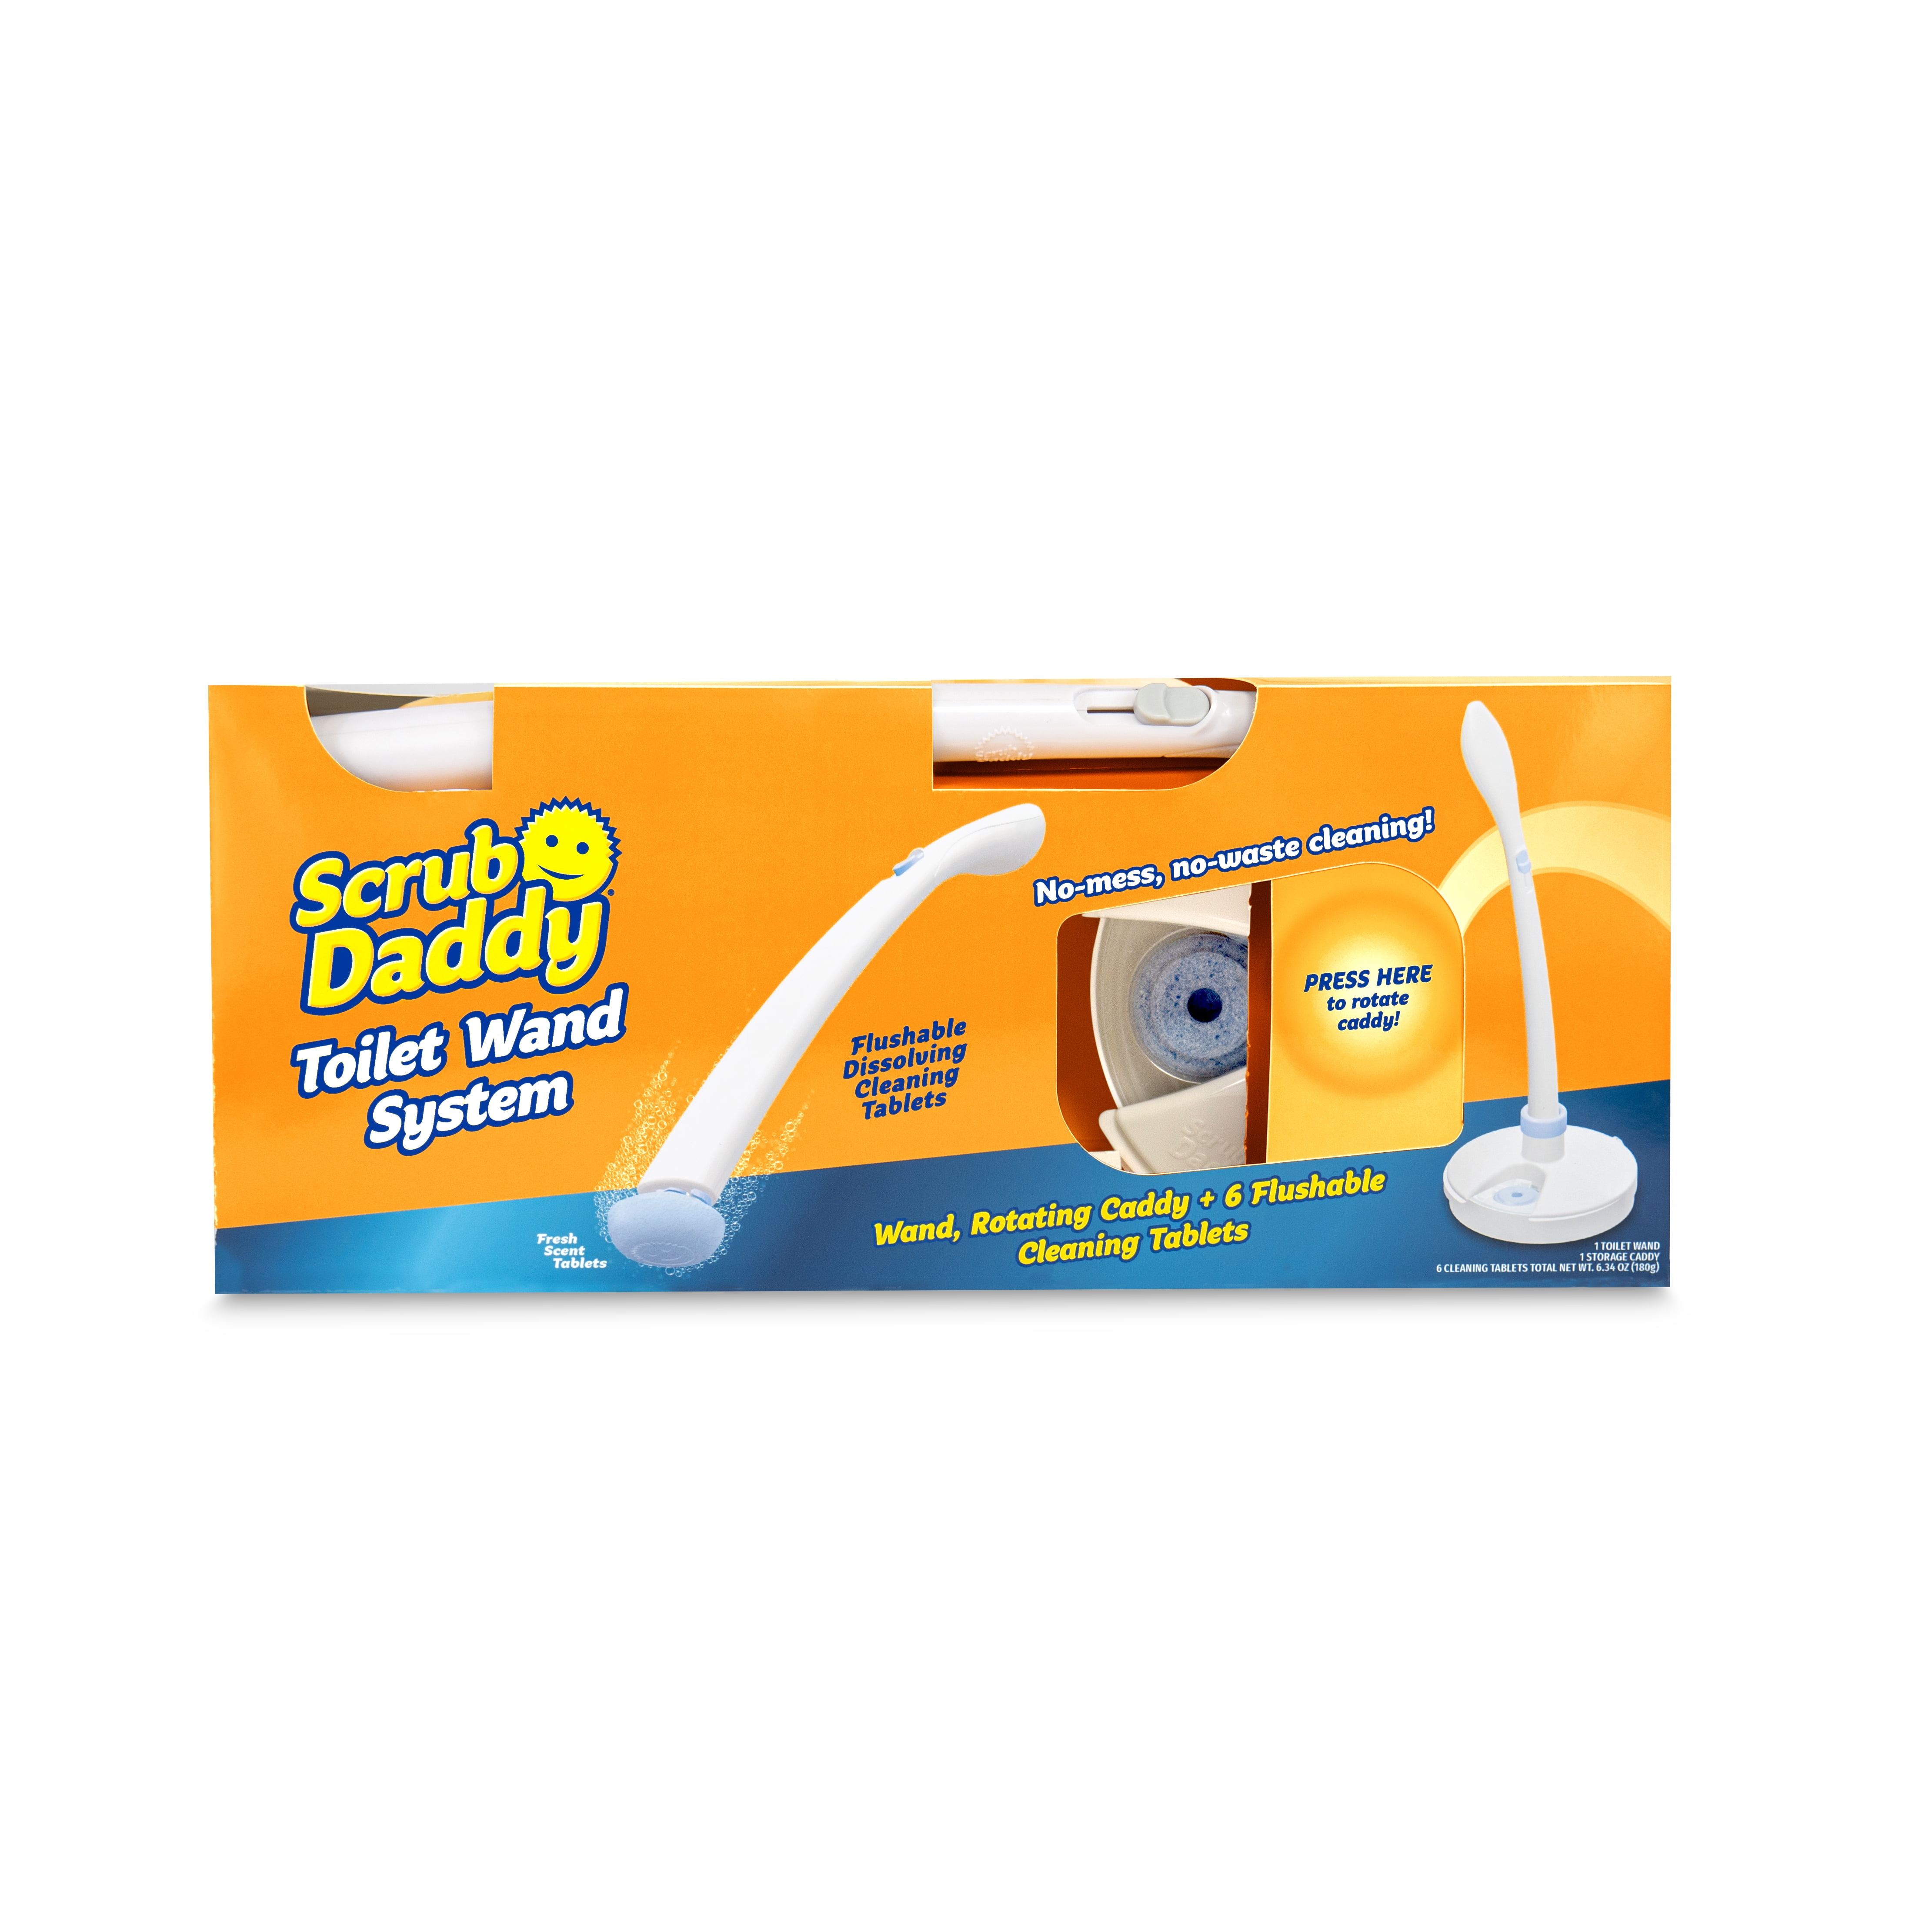 Scrub Daddy Toilet Wand Reviews - Get All You Need